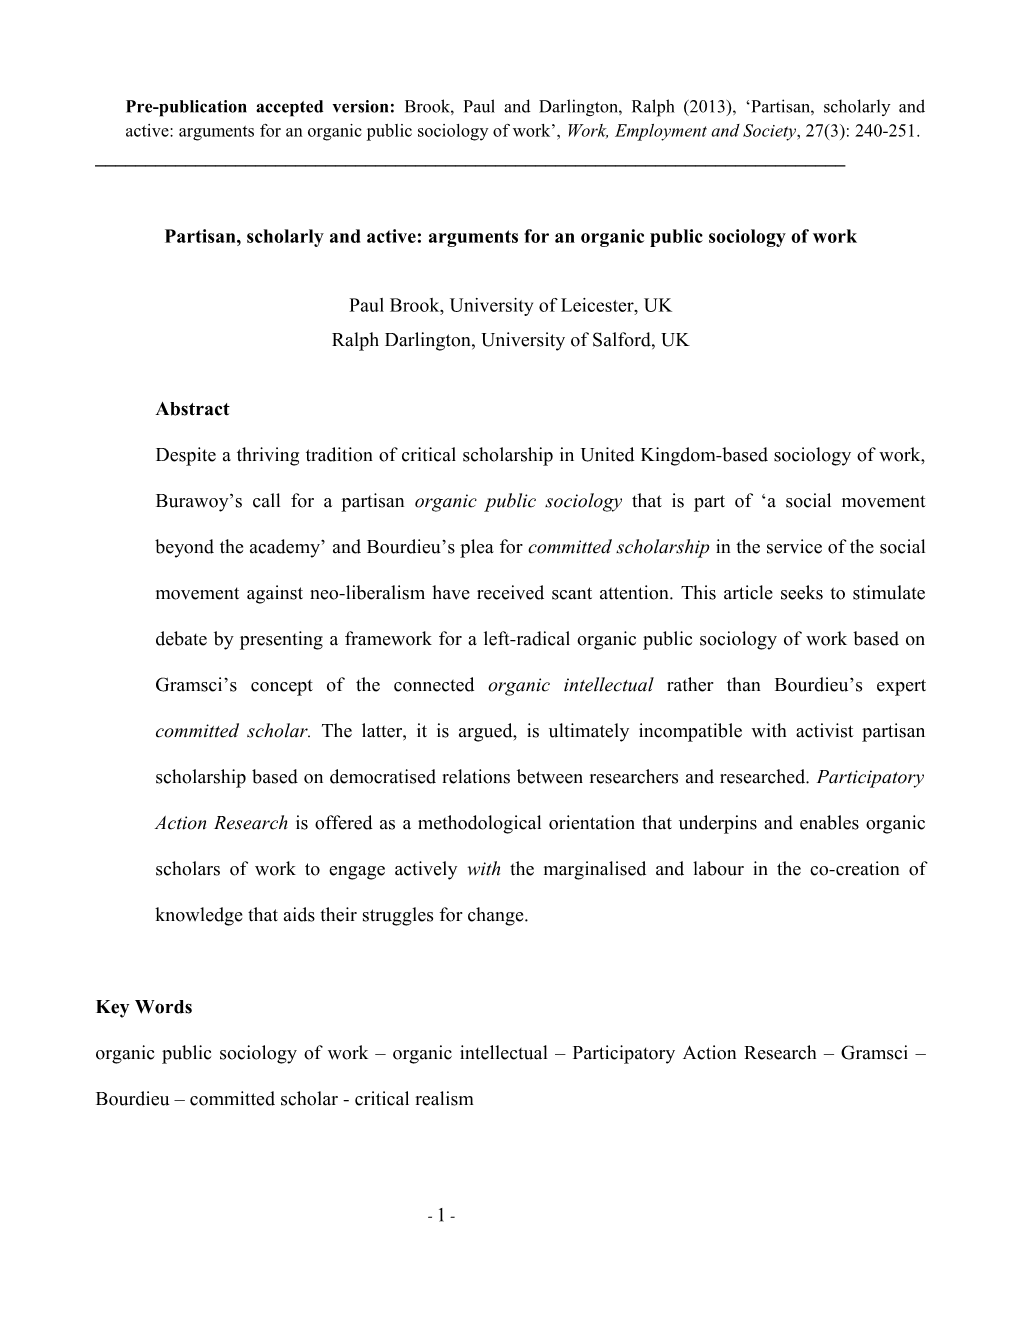 Partisan, Scholarly and Active: Arguments for an Organic Public Sociology of Work